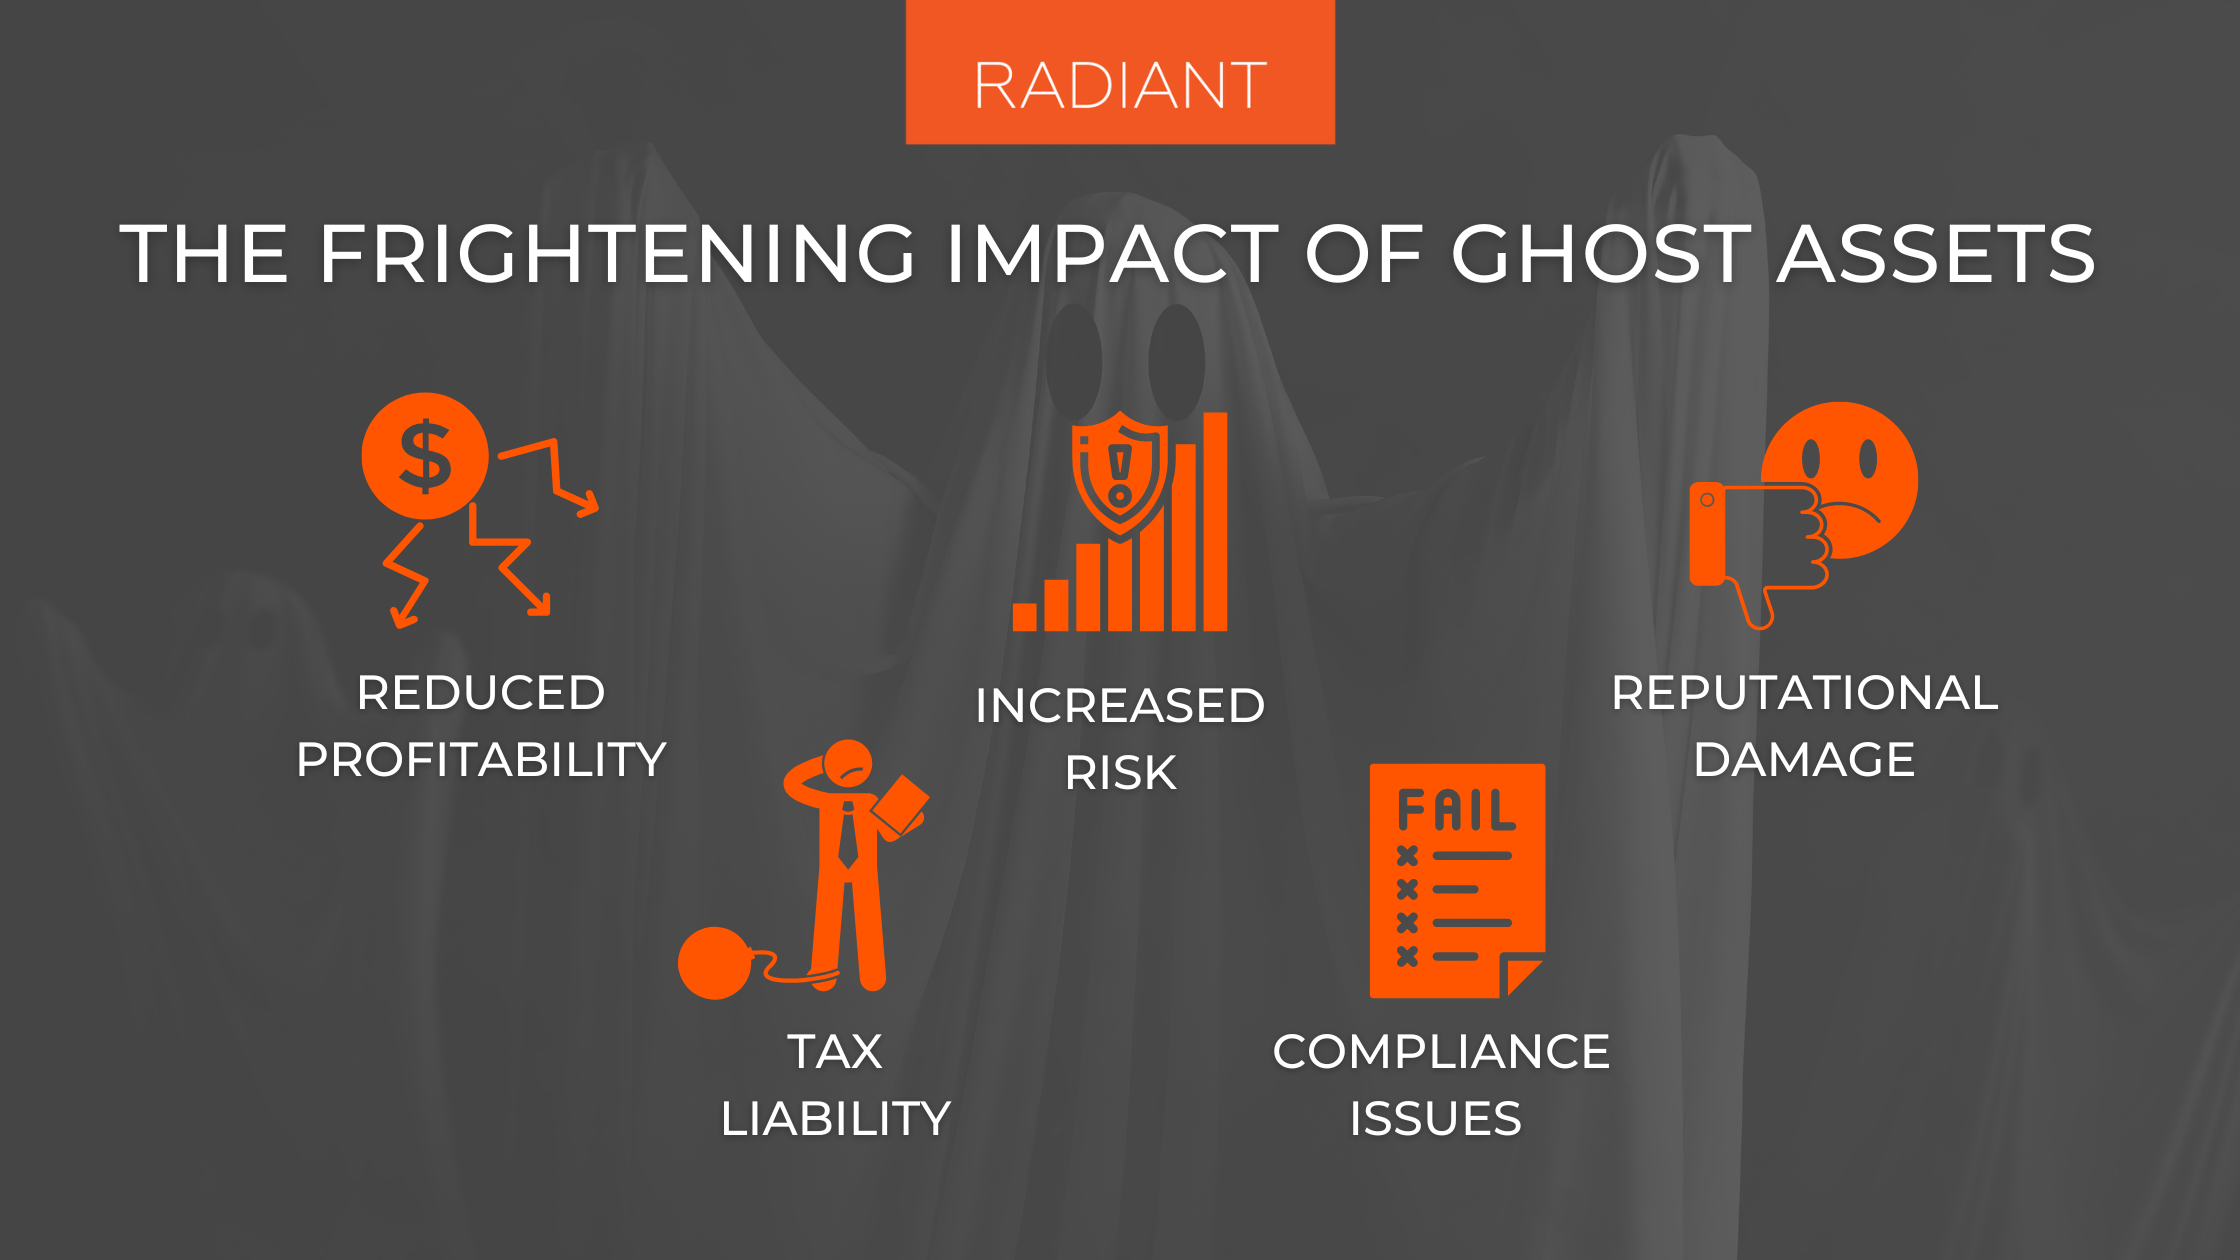 Ghost Assets - Asset Tracking Solutions For Ghost Assets - Asset Tracking Solutions - Ghost Inventory - Eliminate Ghost Assets - Removing Ghost Assets - Identify Ghost Assets - Impact of Ghost Assets - Asset Management System